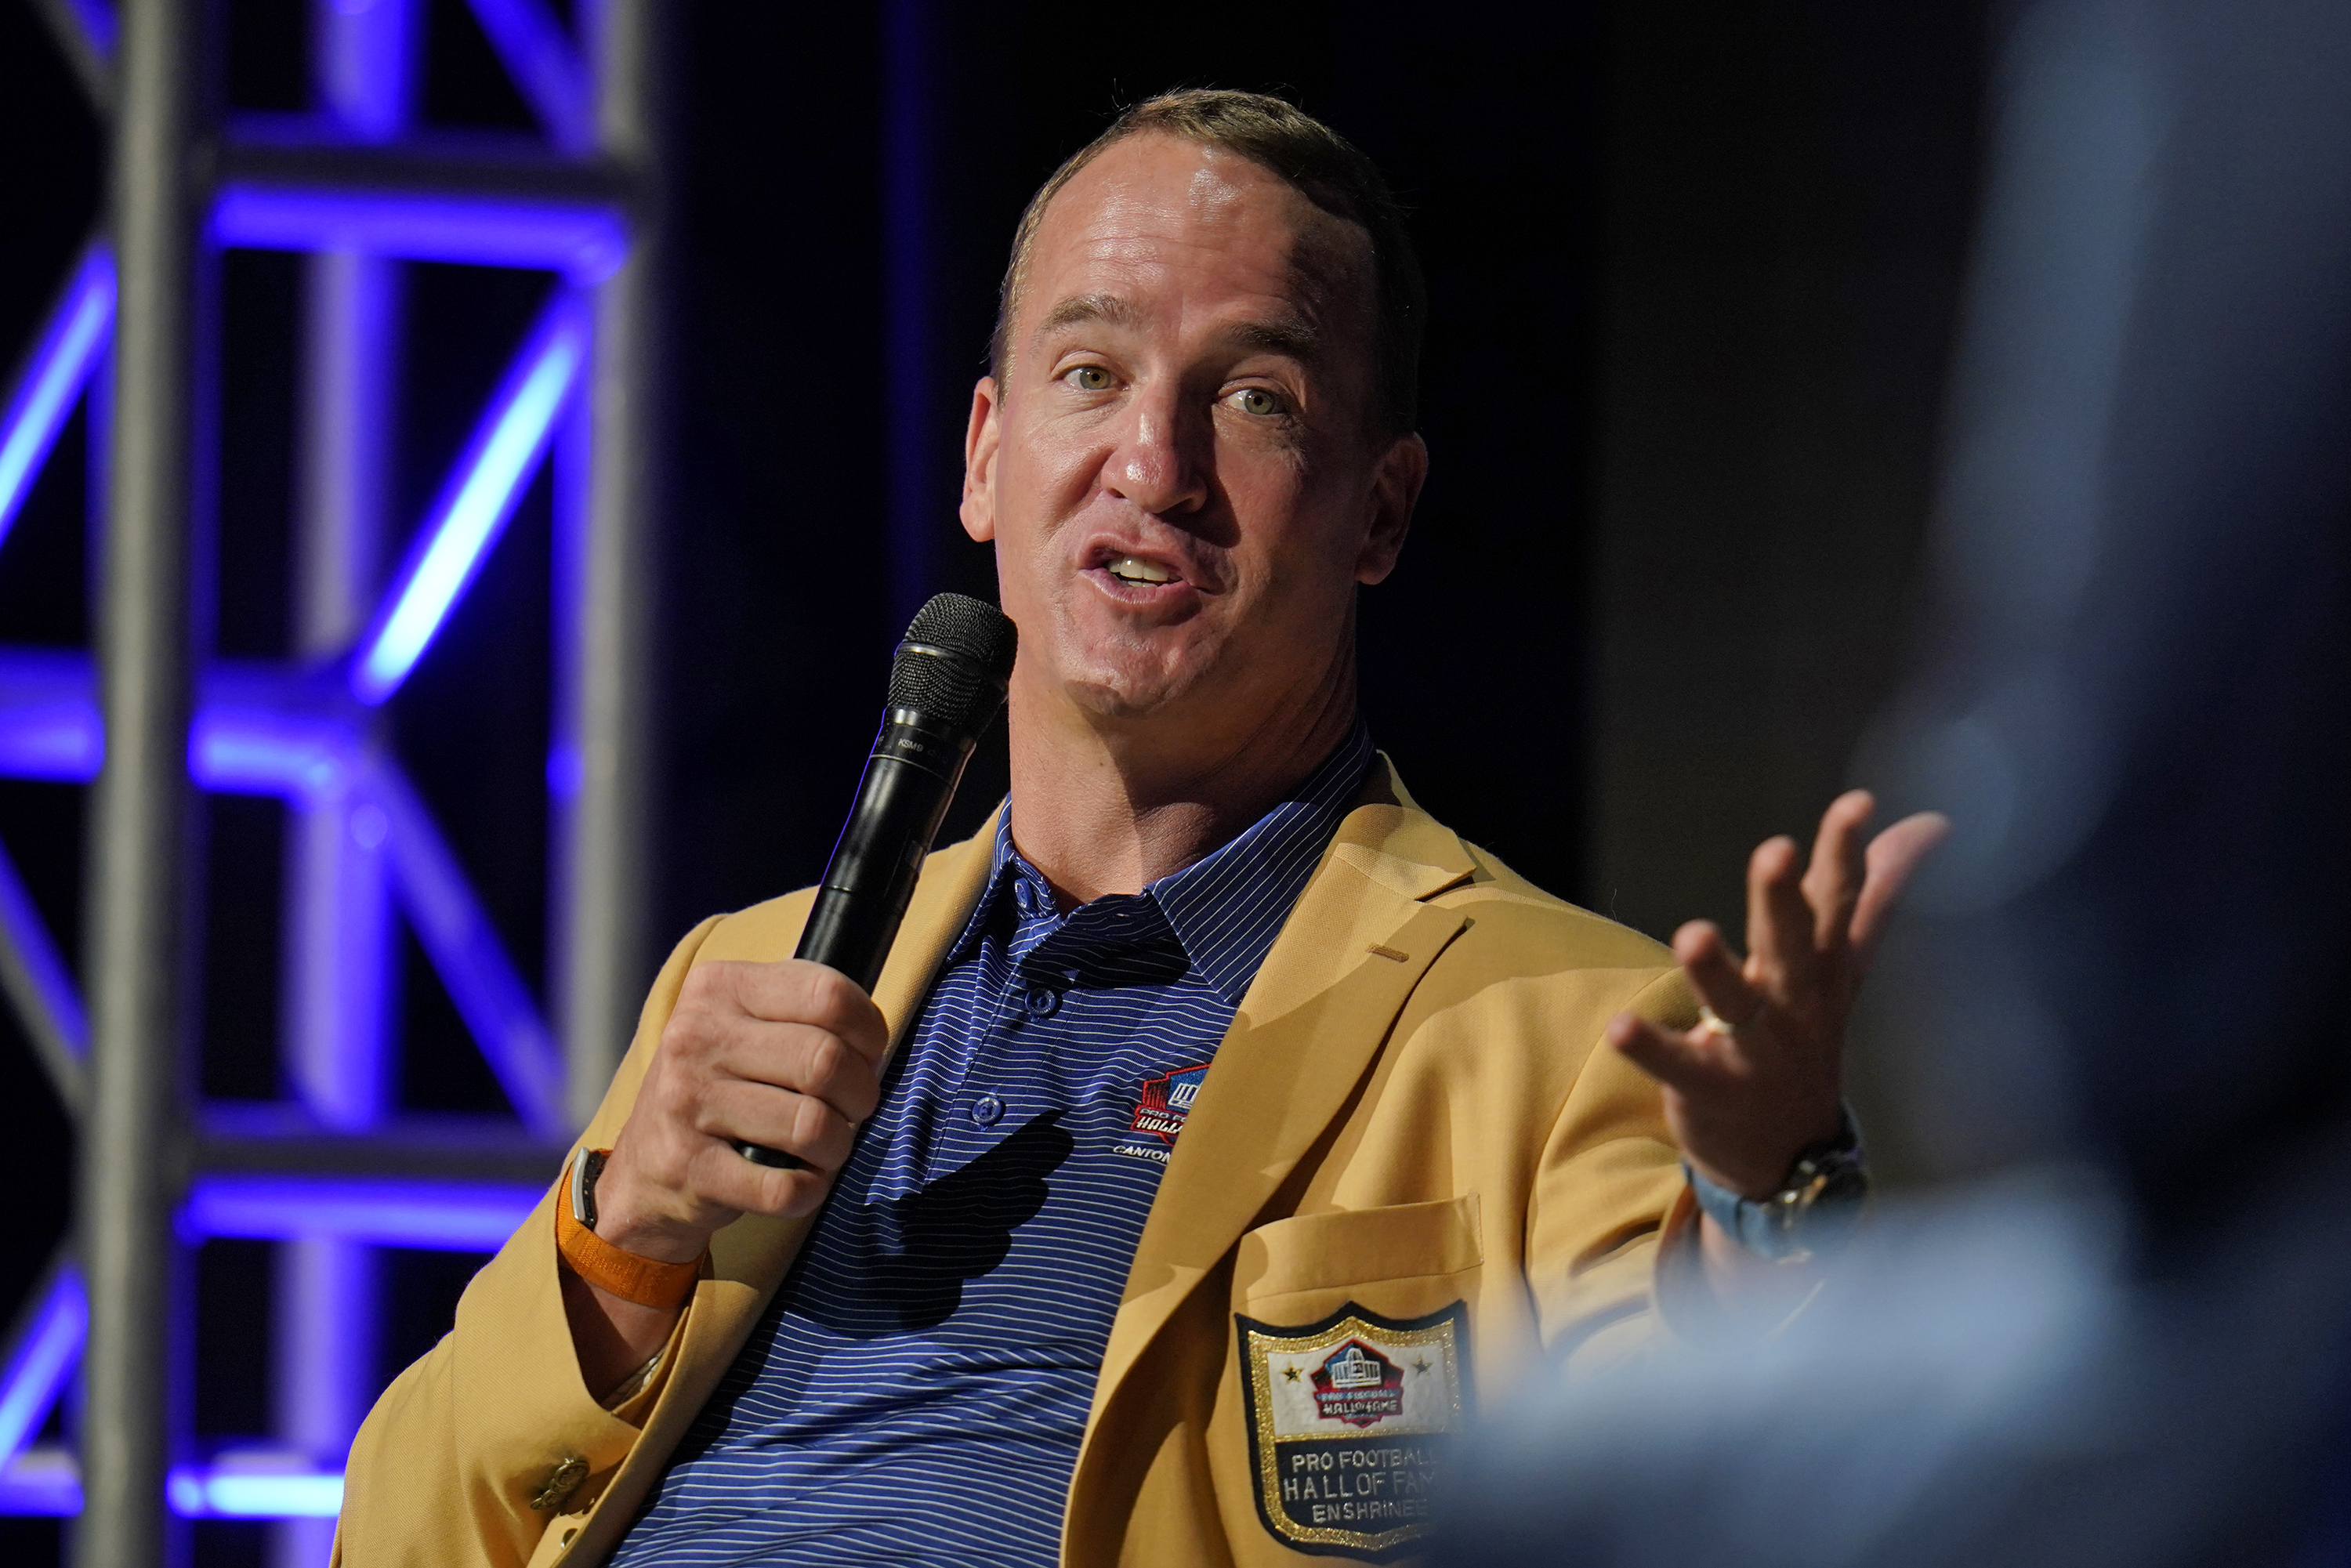 Peyton Manning speaks during a roundtable for Hall of Fame enshrinees